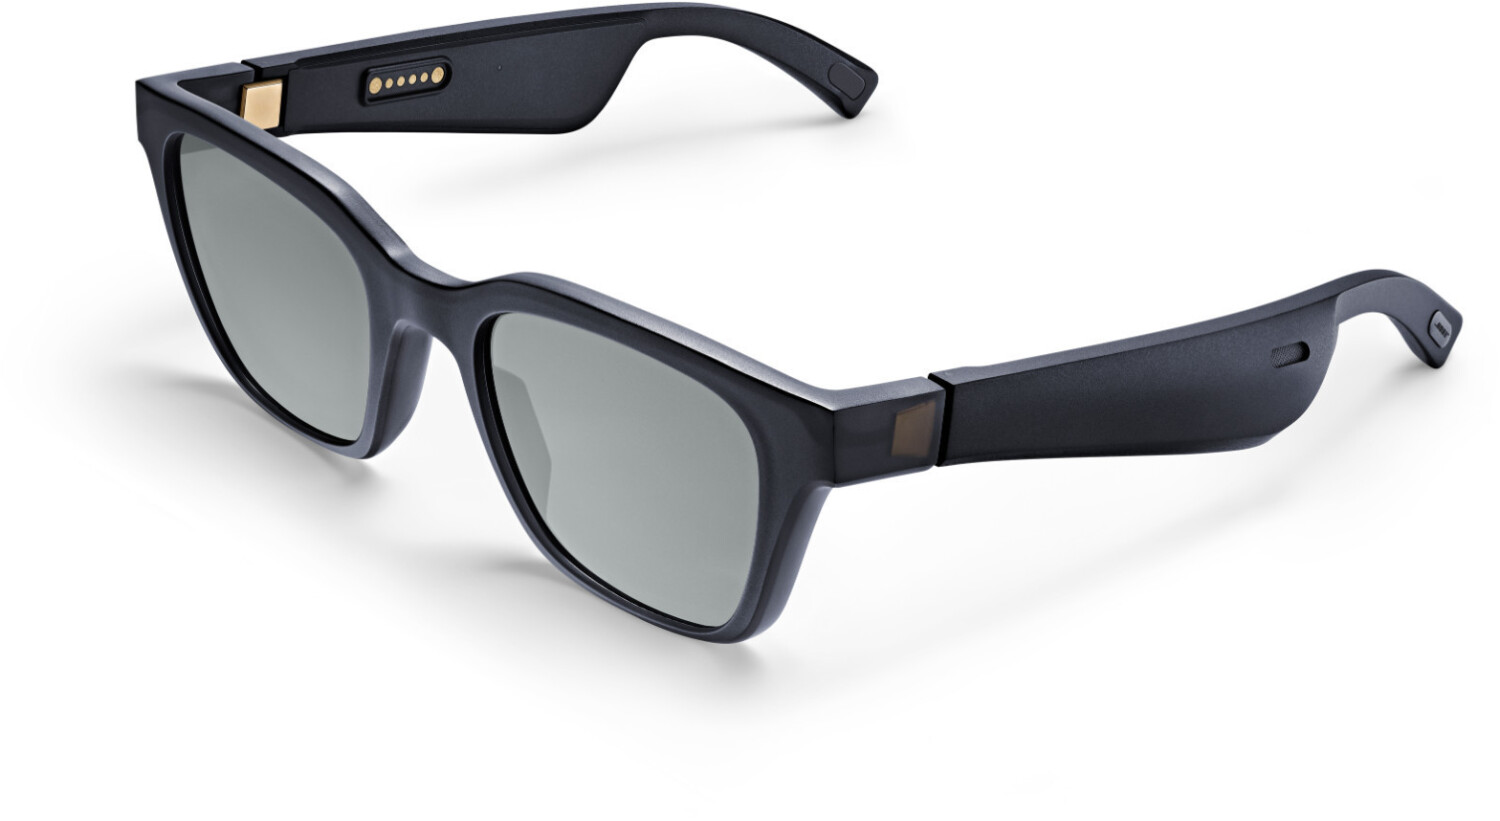 Buy Bose Frames from £150.00 (Today) – Best Deals on idealo.co.uk